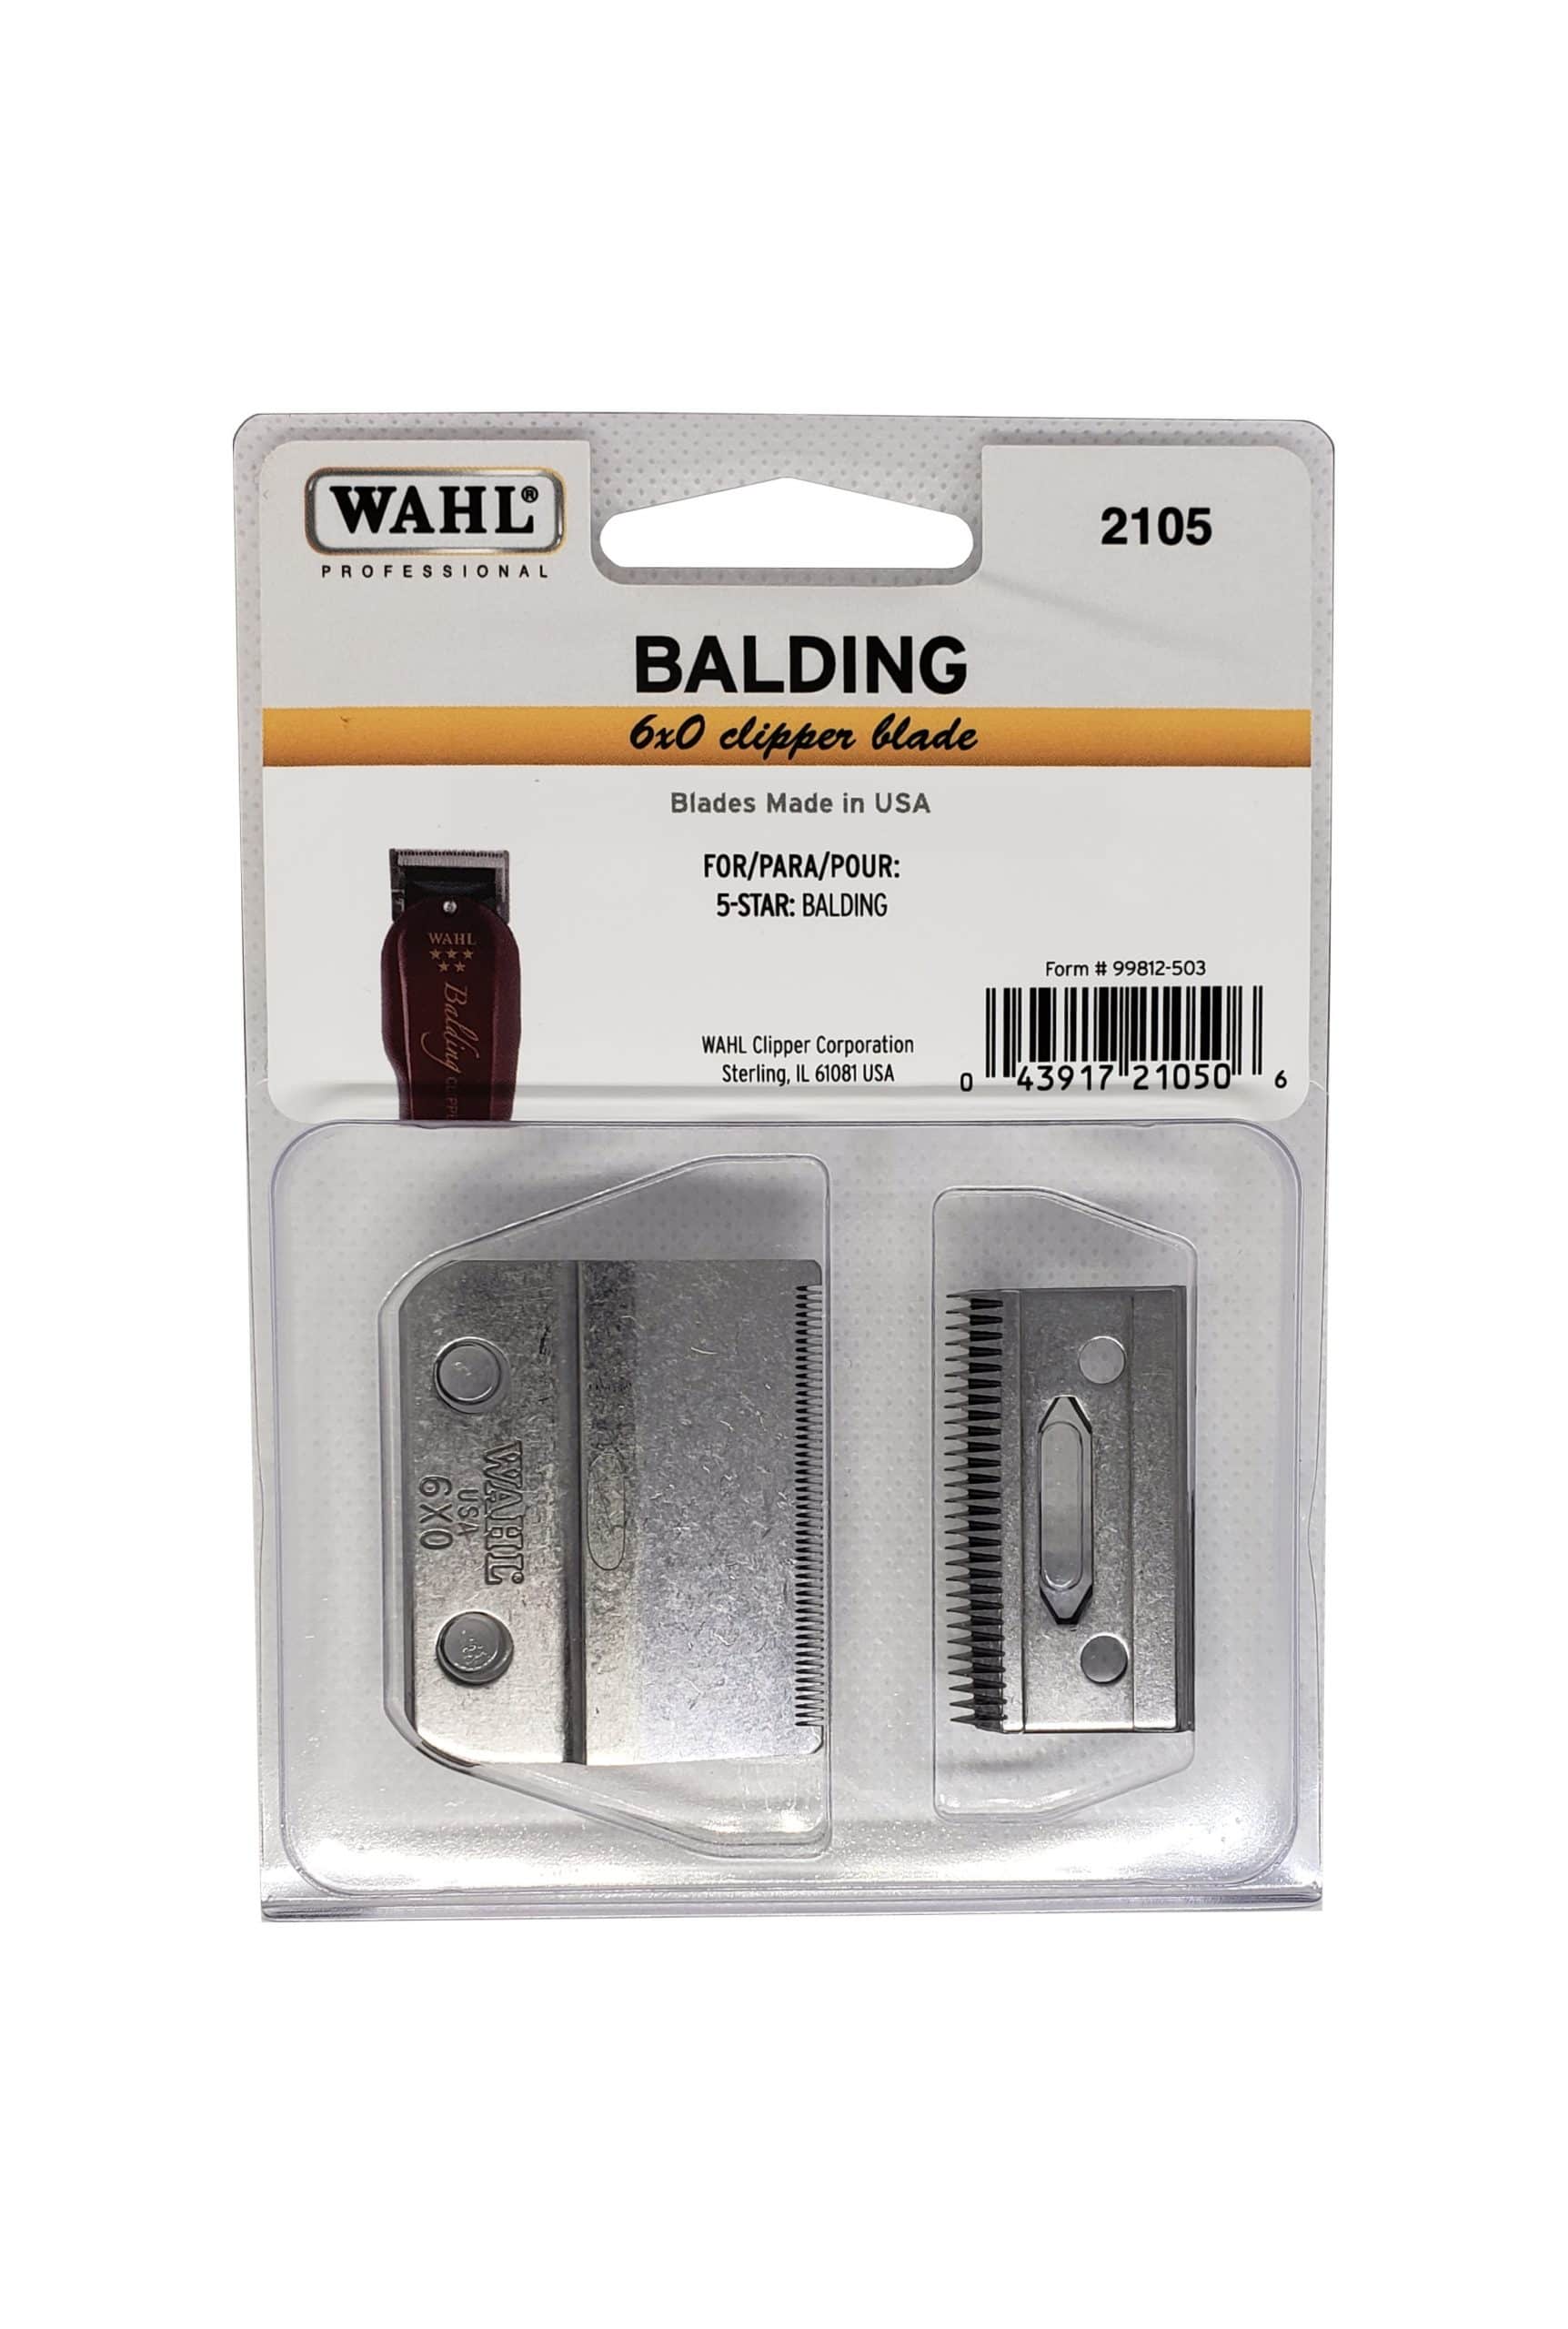 difference between balding clippers and regular clippers